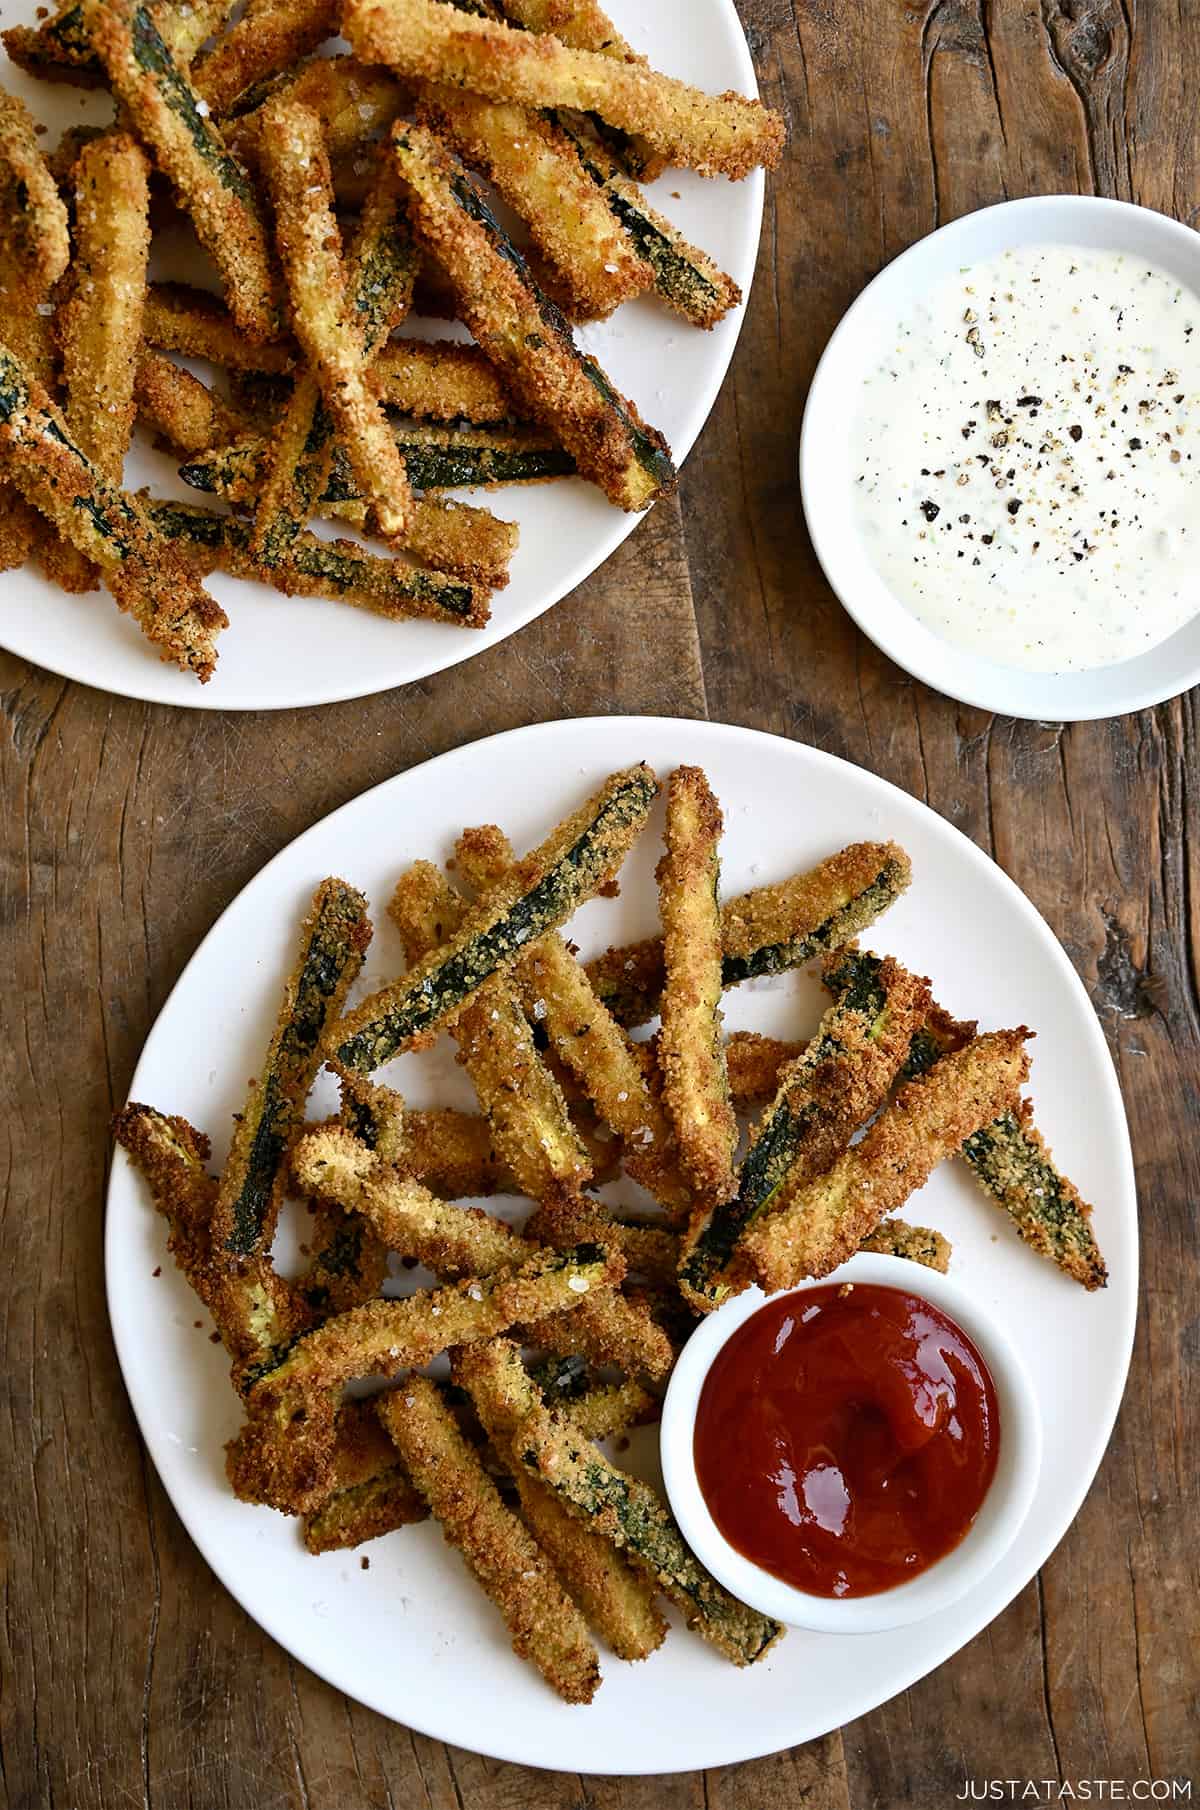 Crispy zucchini fries on a plate with a small bowl containing ketchup.